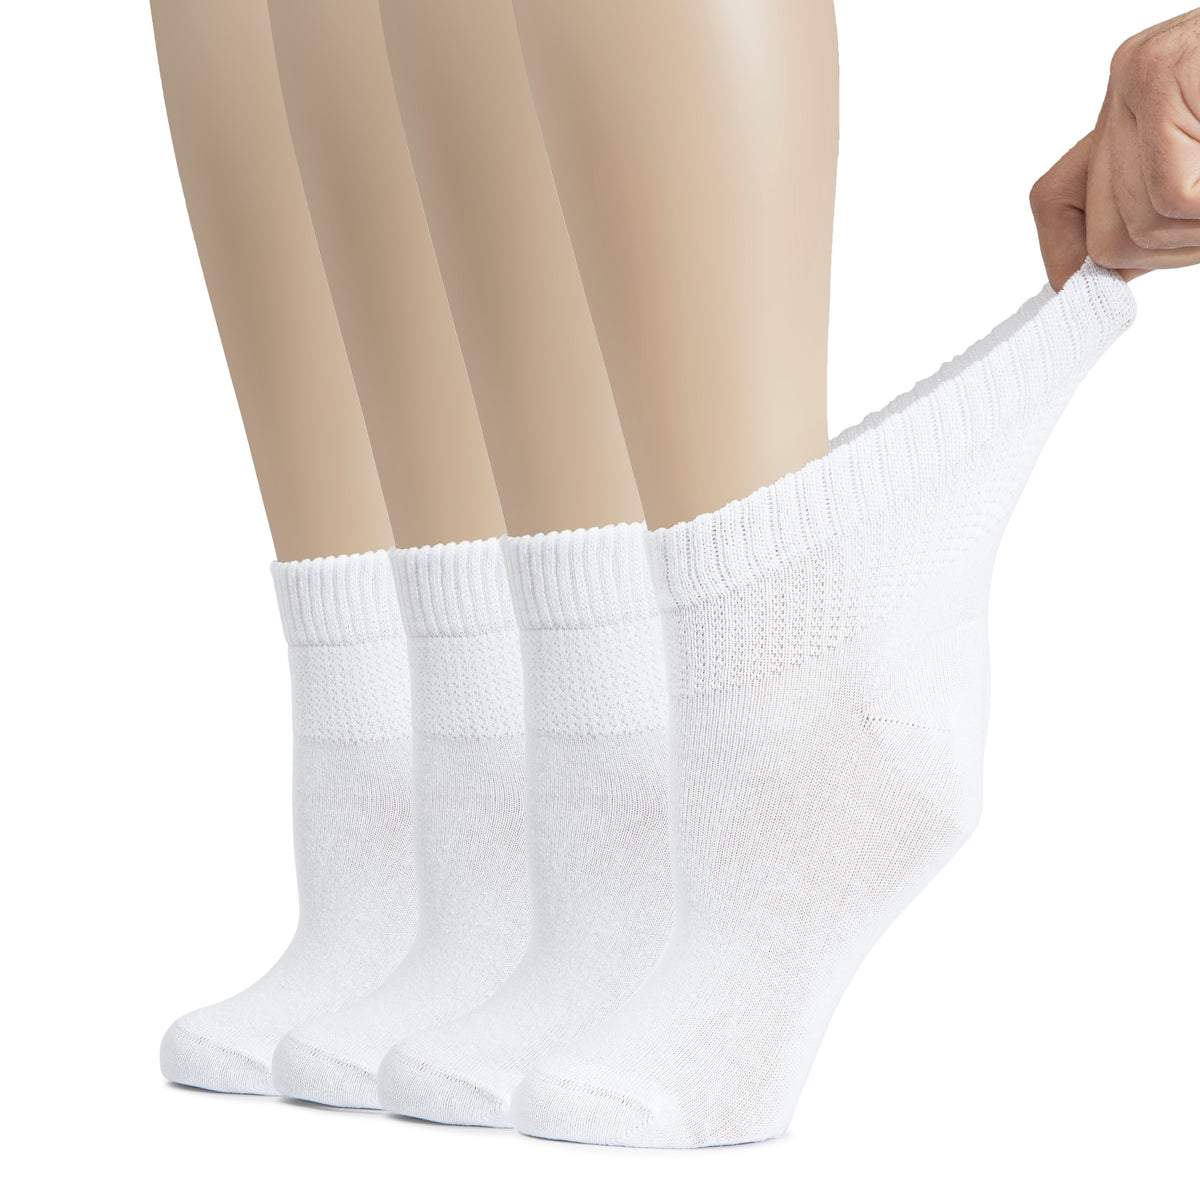  row of white socks made of cotton material designed for women with diabetes. The image shows a woman's feet wearing the socks.